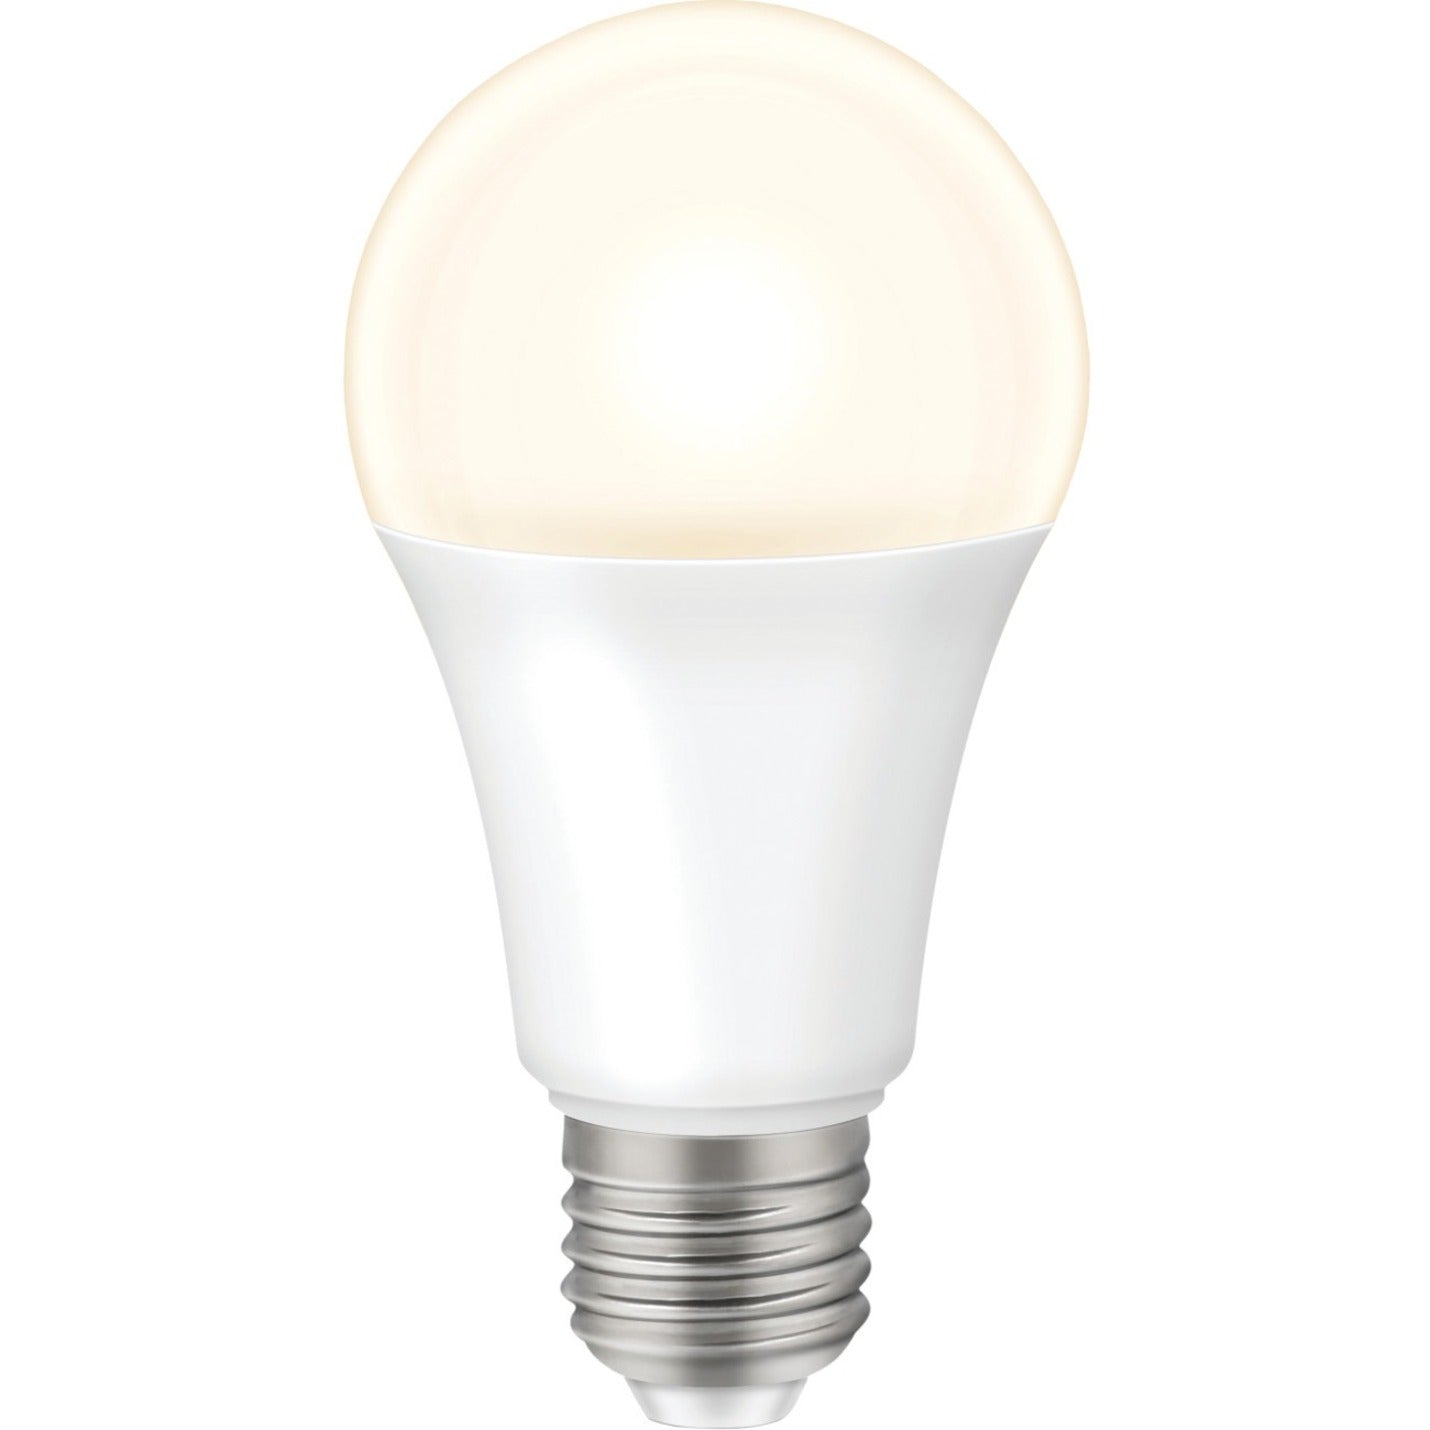 Supersonic SC-846SB WiFi LED Smart Bulb with Voice Control, RGB Light Color, 820 lm, 9W